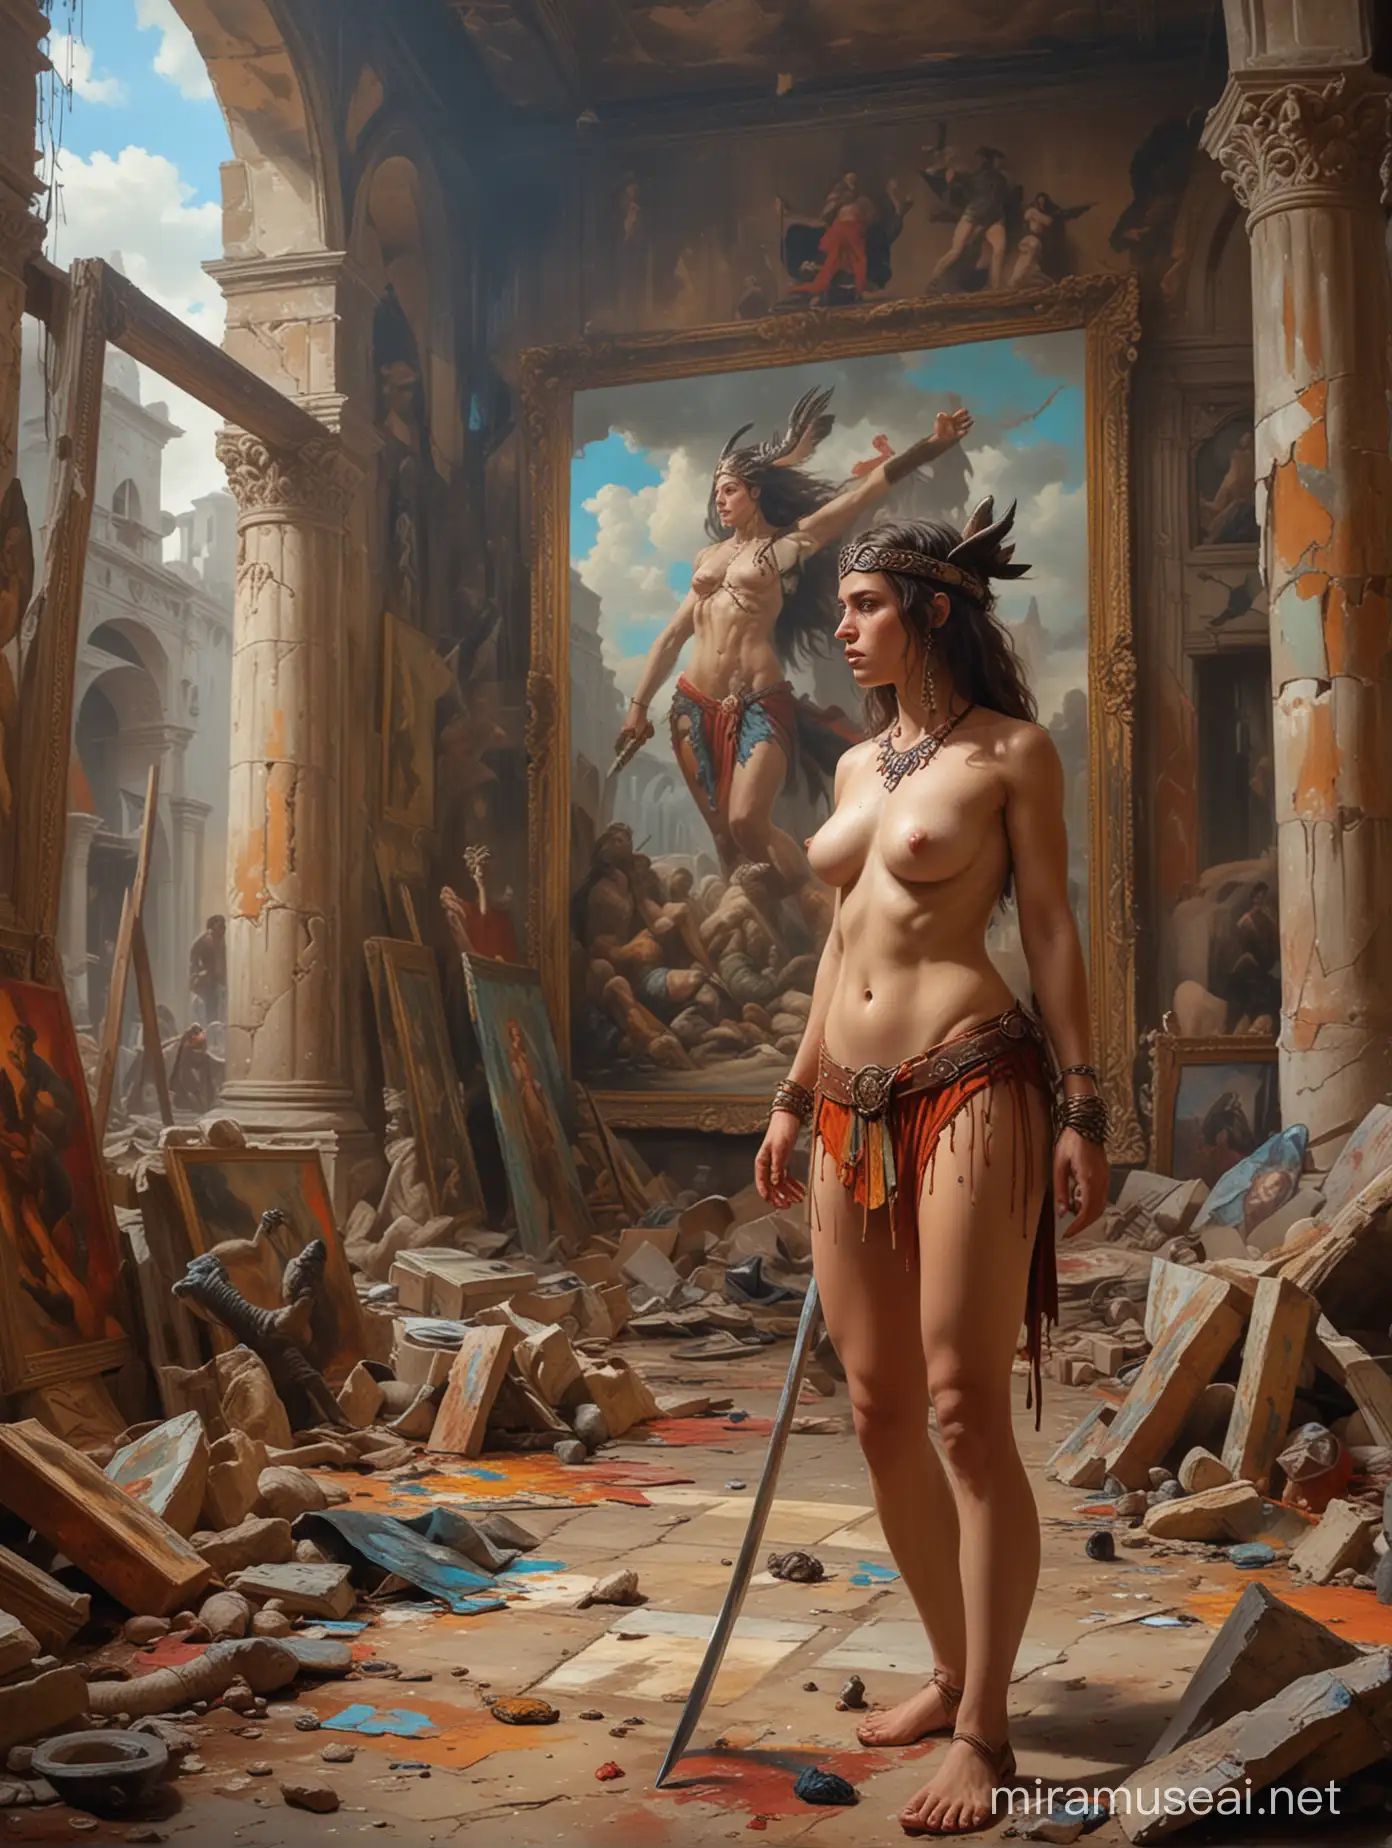 A Barbarian woman vs hall of paintings in the art exhibition Gallery. surreal,  Attractive strong colors, a Cinematic, Stunningly detailed,Oil Painting technique. with Weird Creatures Jini. in ruins. surreal